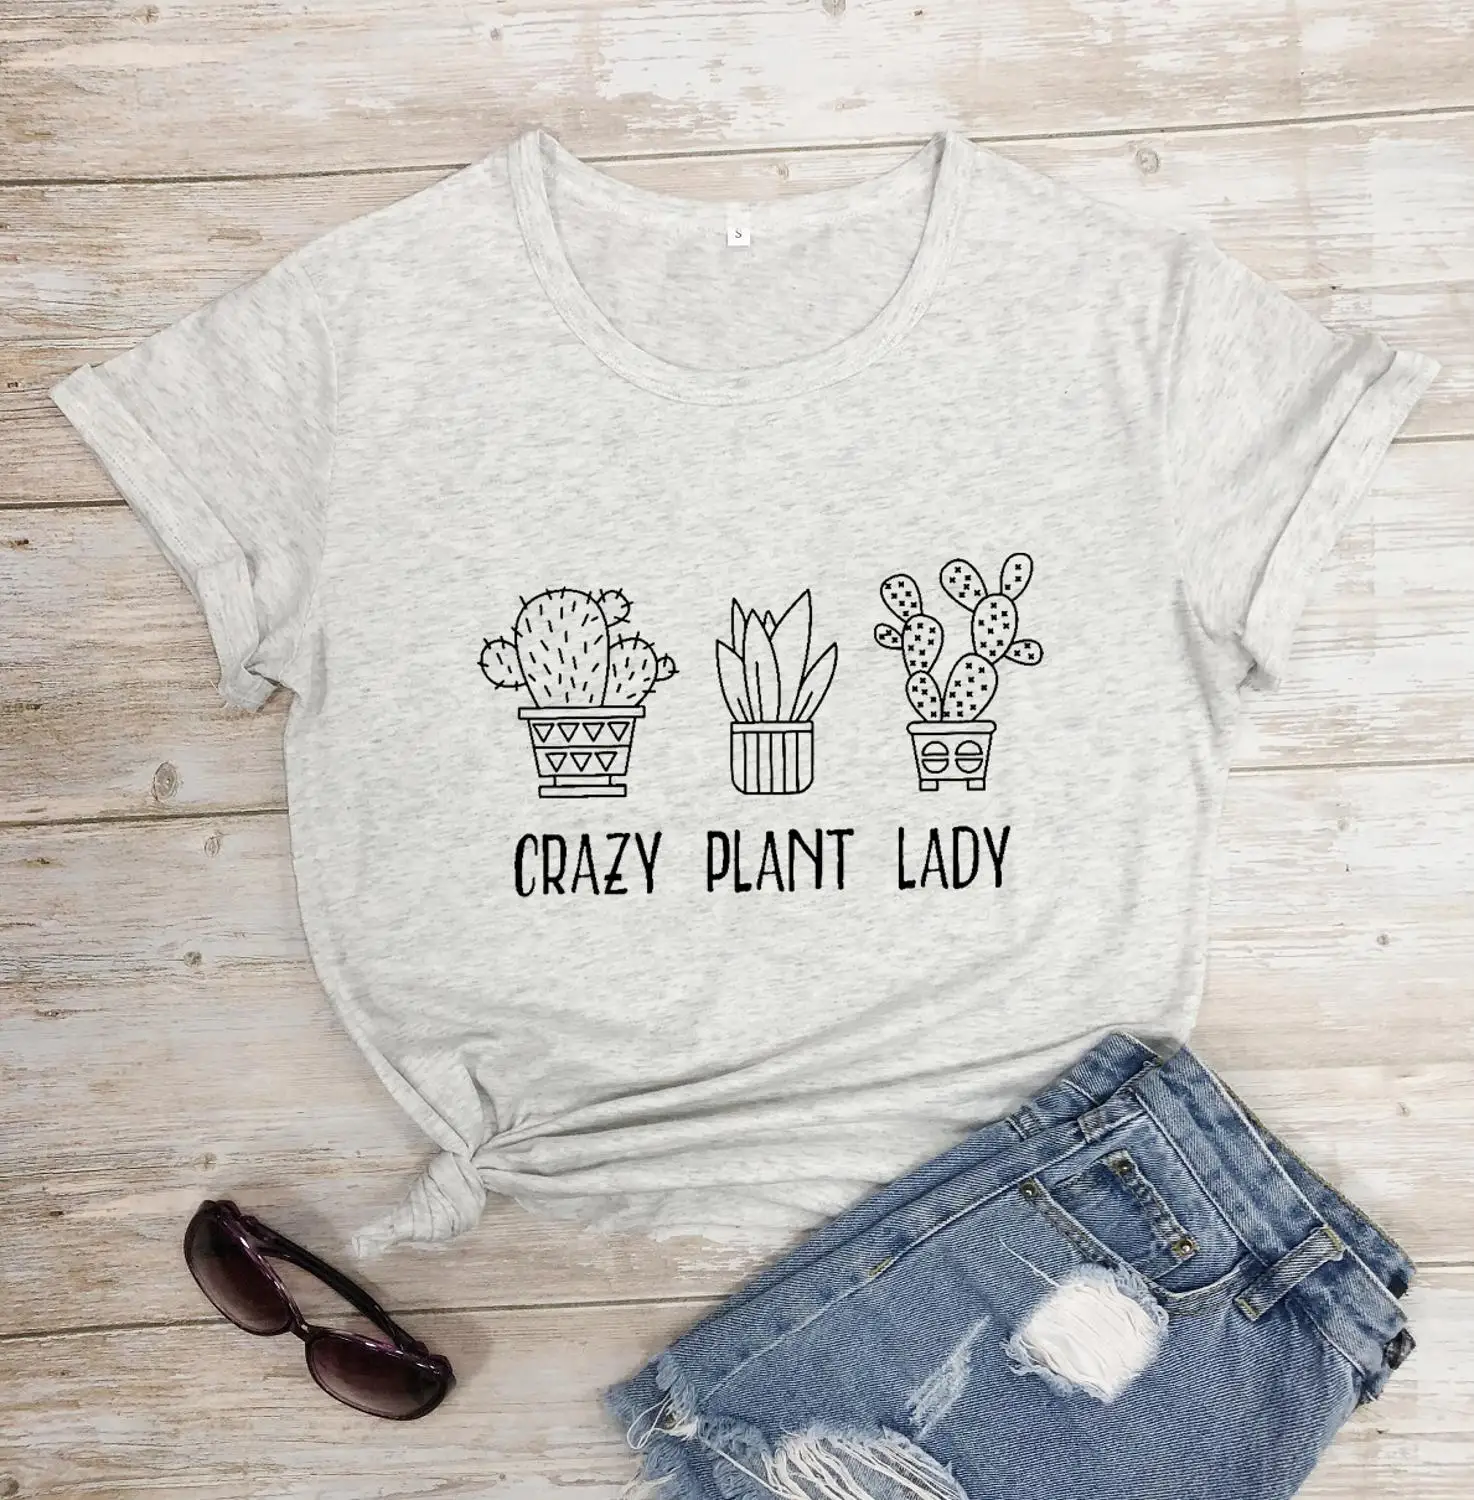 Crazy Plant Lady Funny Novelty Tops T-Shirt Womens tee TShirt 